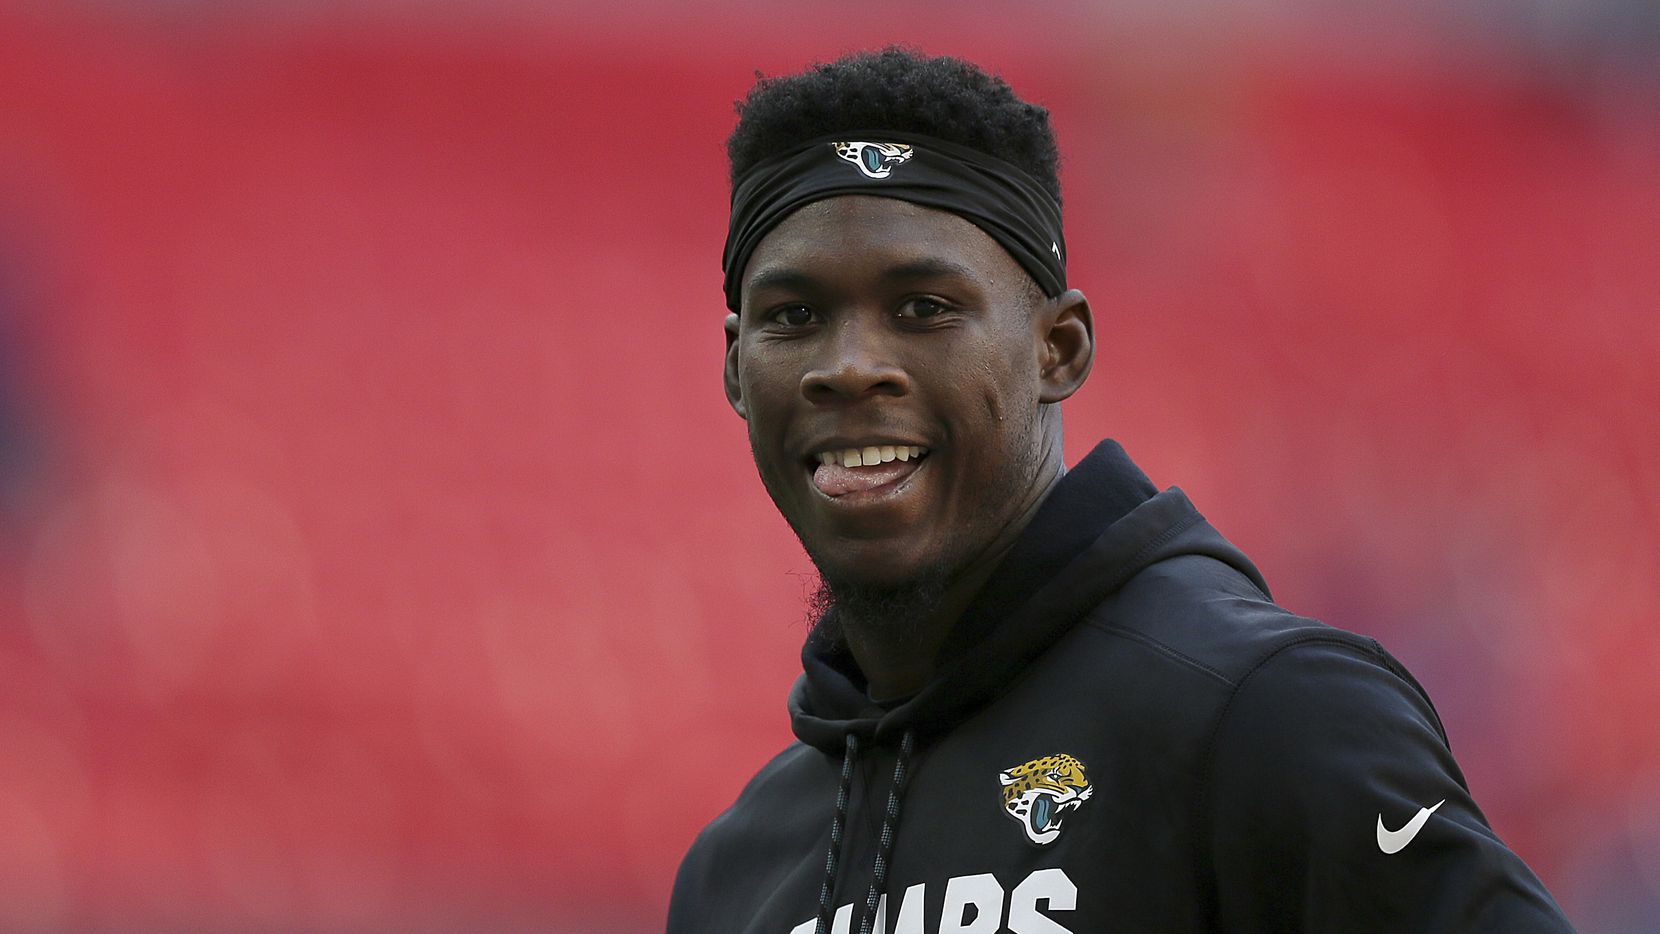 Jacksonville Jaguars wide receiver Allen Hurns smiles during a warm-up before an NFL football game between the Jaguars and the Baltimore Ravens at Wembley Stadium in London, Sunday Sept. 24, 2017. (AP Photo/Tim Ireland)